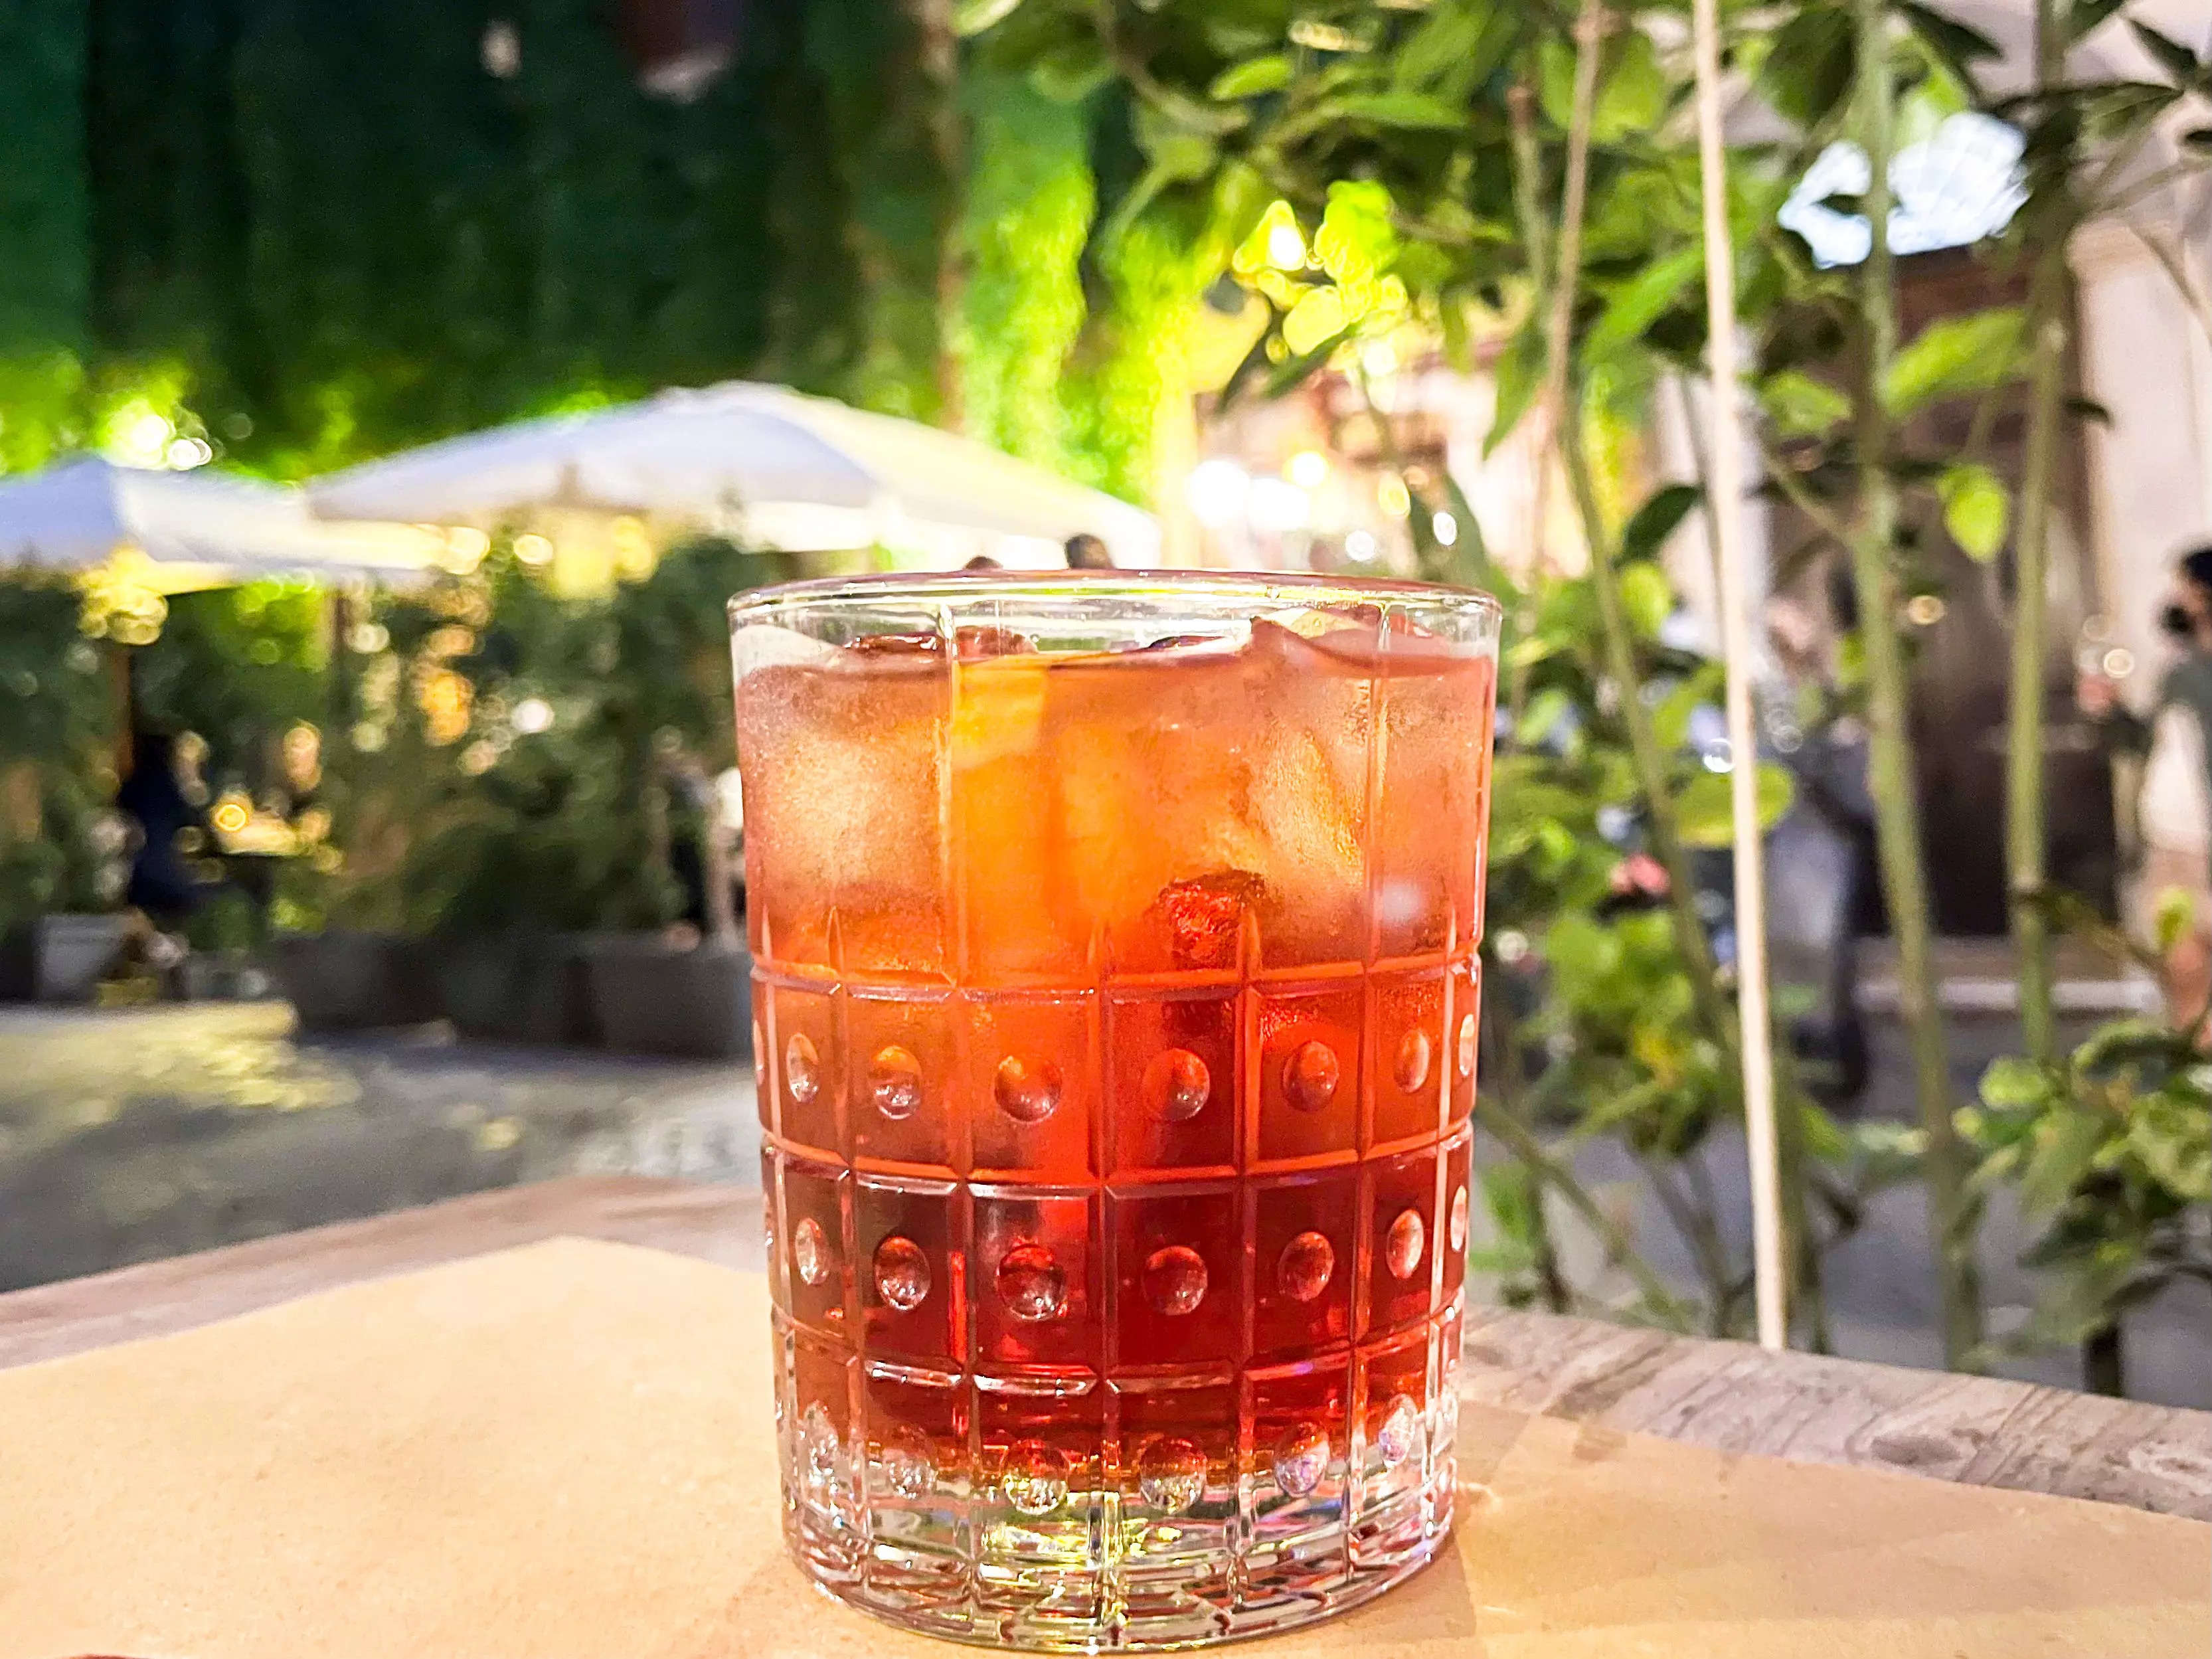 A Milano-Torino cocktail on a table in front of a vine covered building.